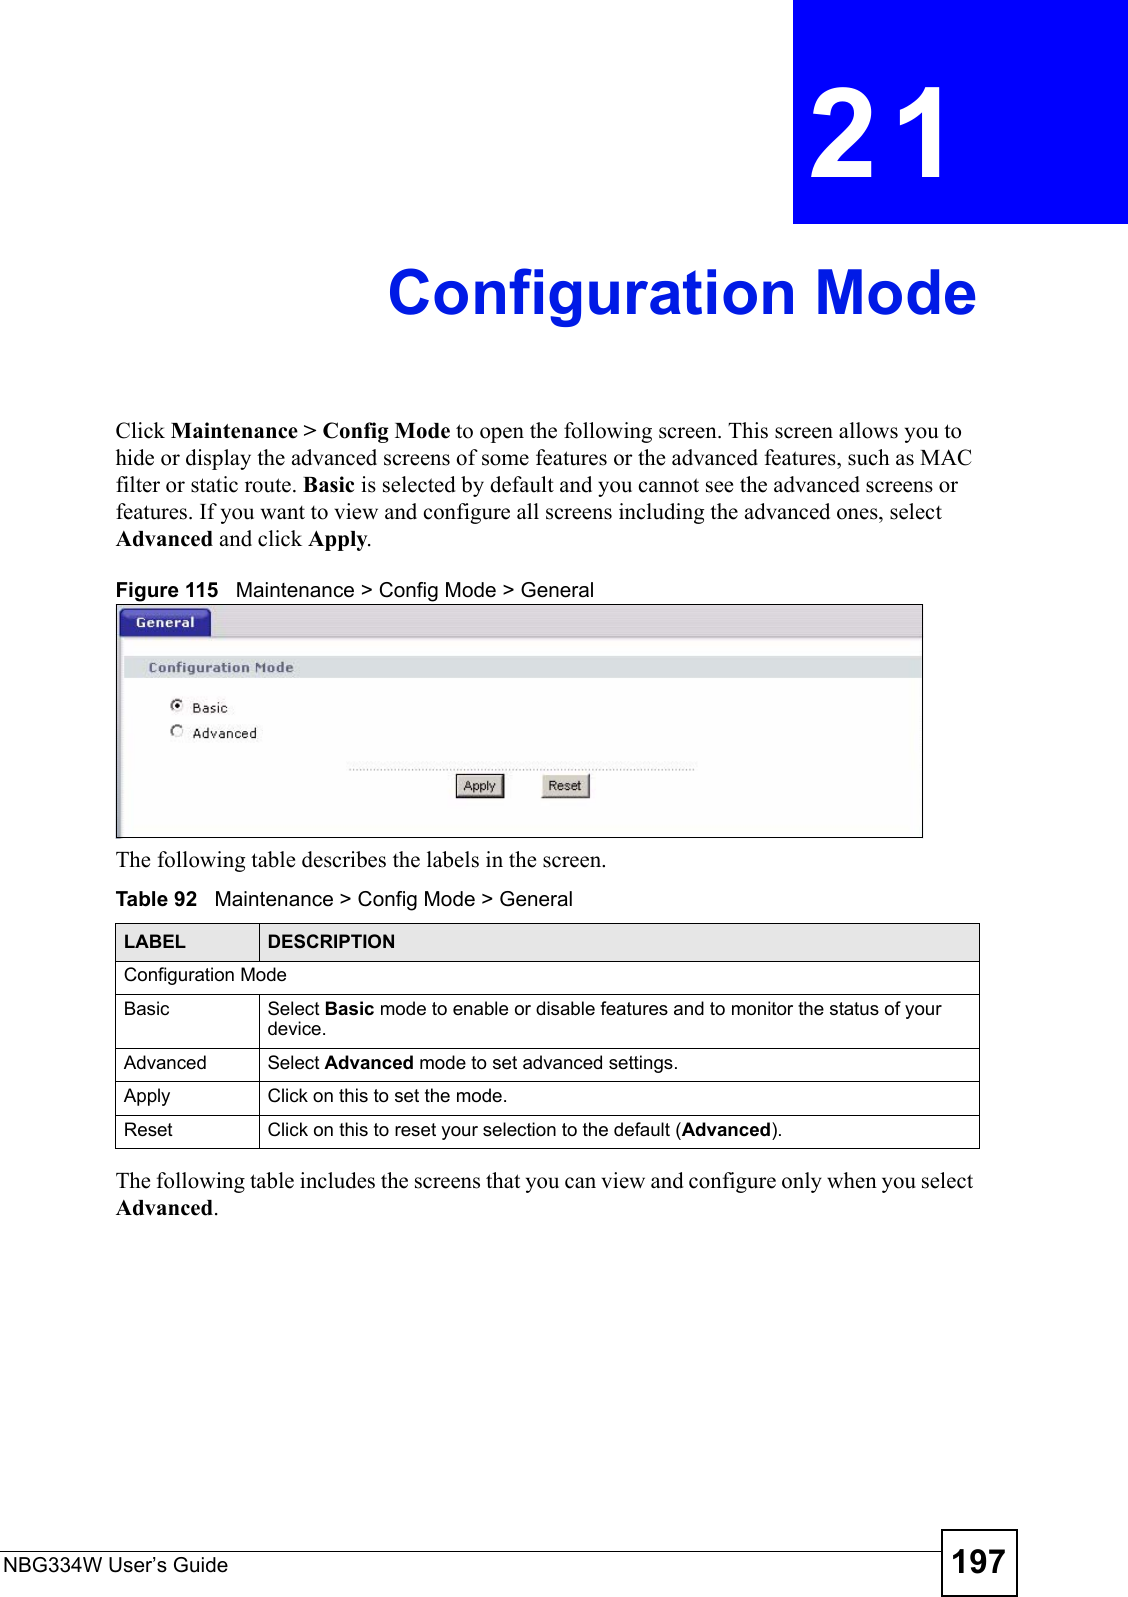 NBG334W User’s Guide 197CHAPTER  21 Configuration ModeClick Maintenance &gt; Config Mode to open the following screen. This screen allows you to hide or display the advanced screens of some features or the advanced features, such as MAC filter or static route. Basic is selected by default and you cannot see the advanced screens or features. If you want to view and configure all screens including the advanced ones, select Advanced and click Apply. Figure 115   Maintenance &gt; Config Mode &gt; General The following table describes the labels in the screen.Table 92   Maintenance &gt; Config Mode &gt; General The following table includes the screens that you can view and configure only when you select Advanced.LABEL DESCRIPTIONConfiguration ModeBasic Select Basic mode to enable or disable features and to monitor the status of your device.Advanced Select Advanced mode to set advanced settings.Apply Click on this to set the mode.Reset Click on this to reset your selection to the default (Advanced).